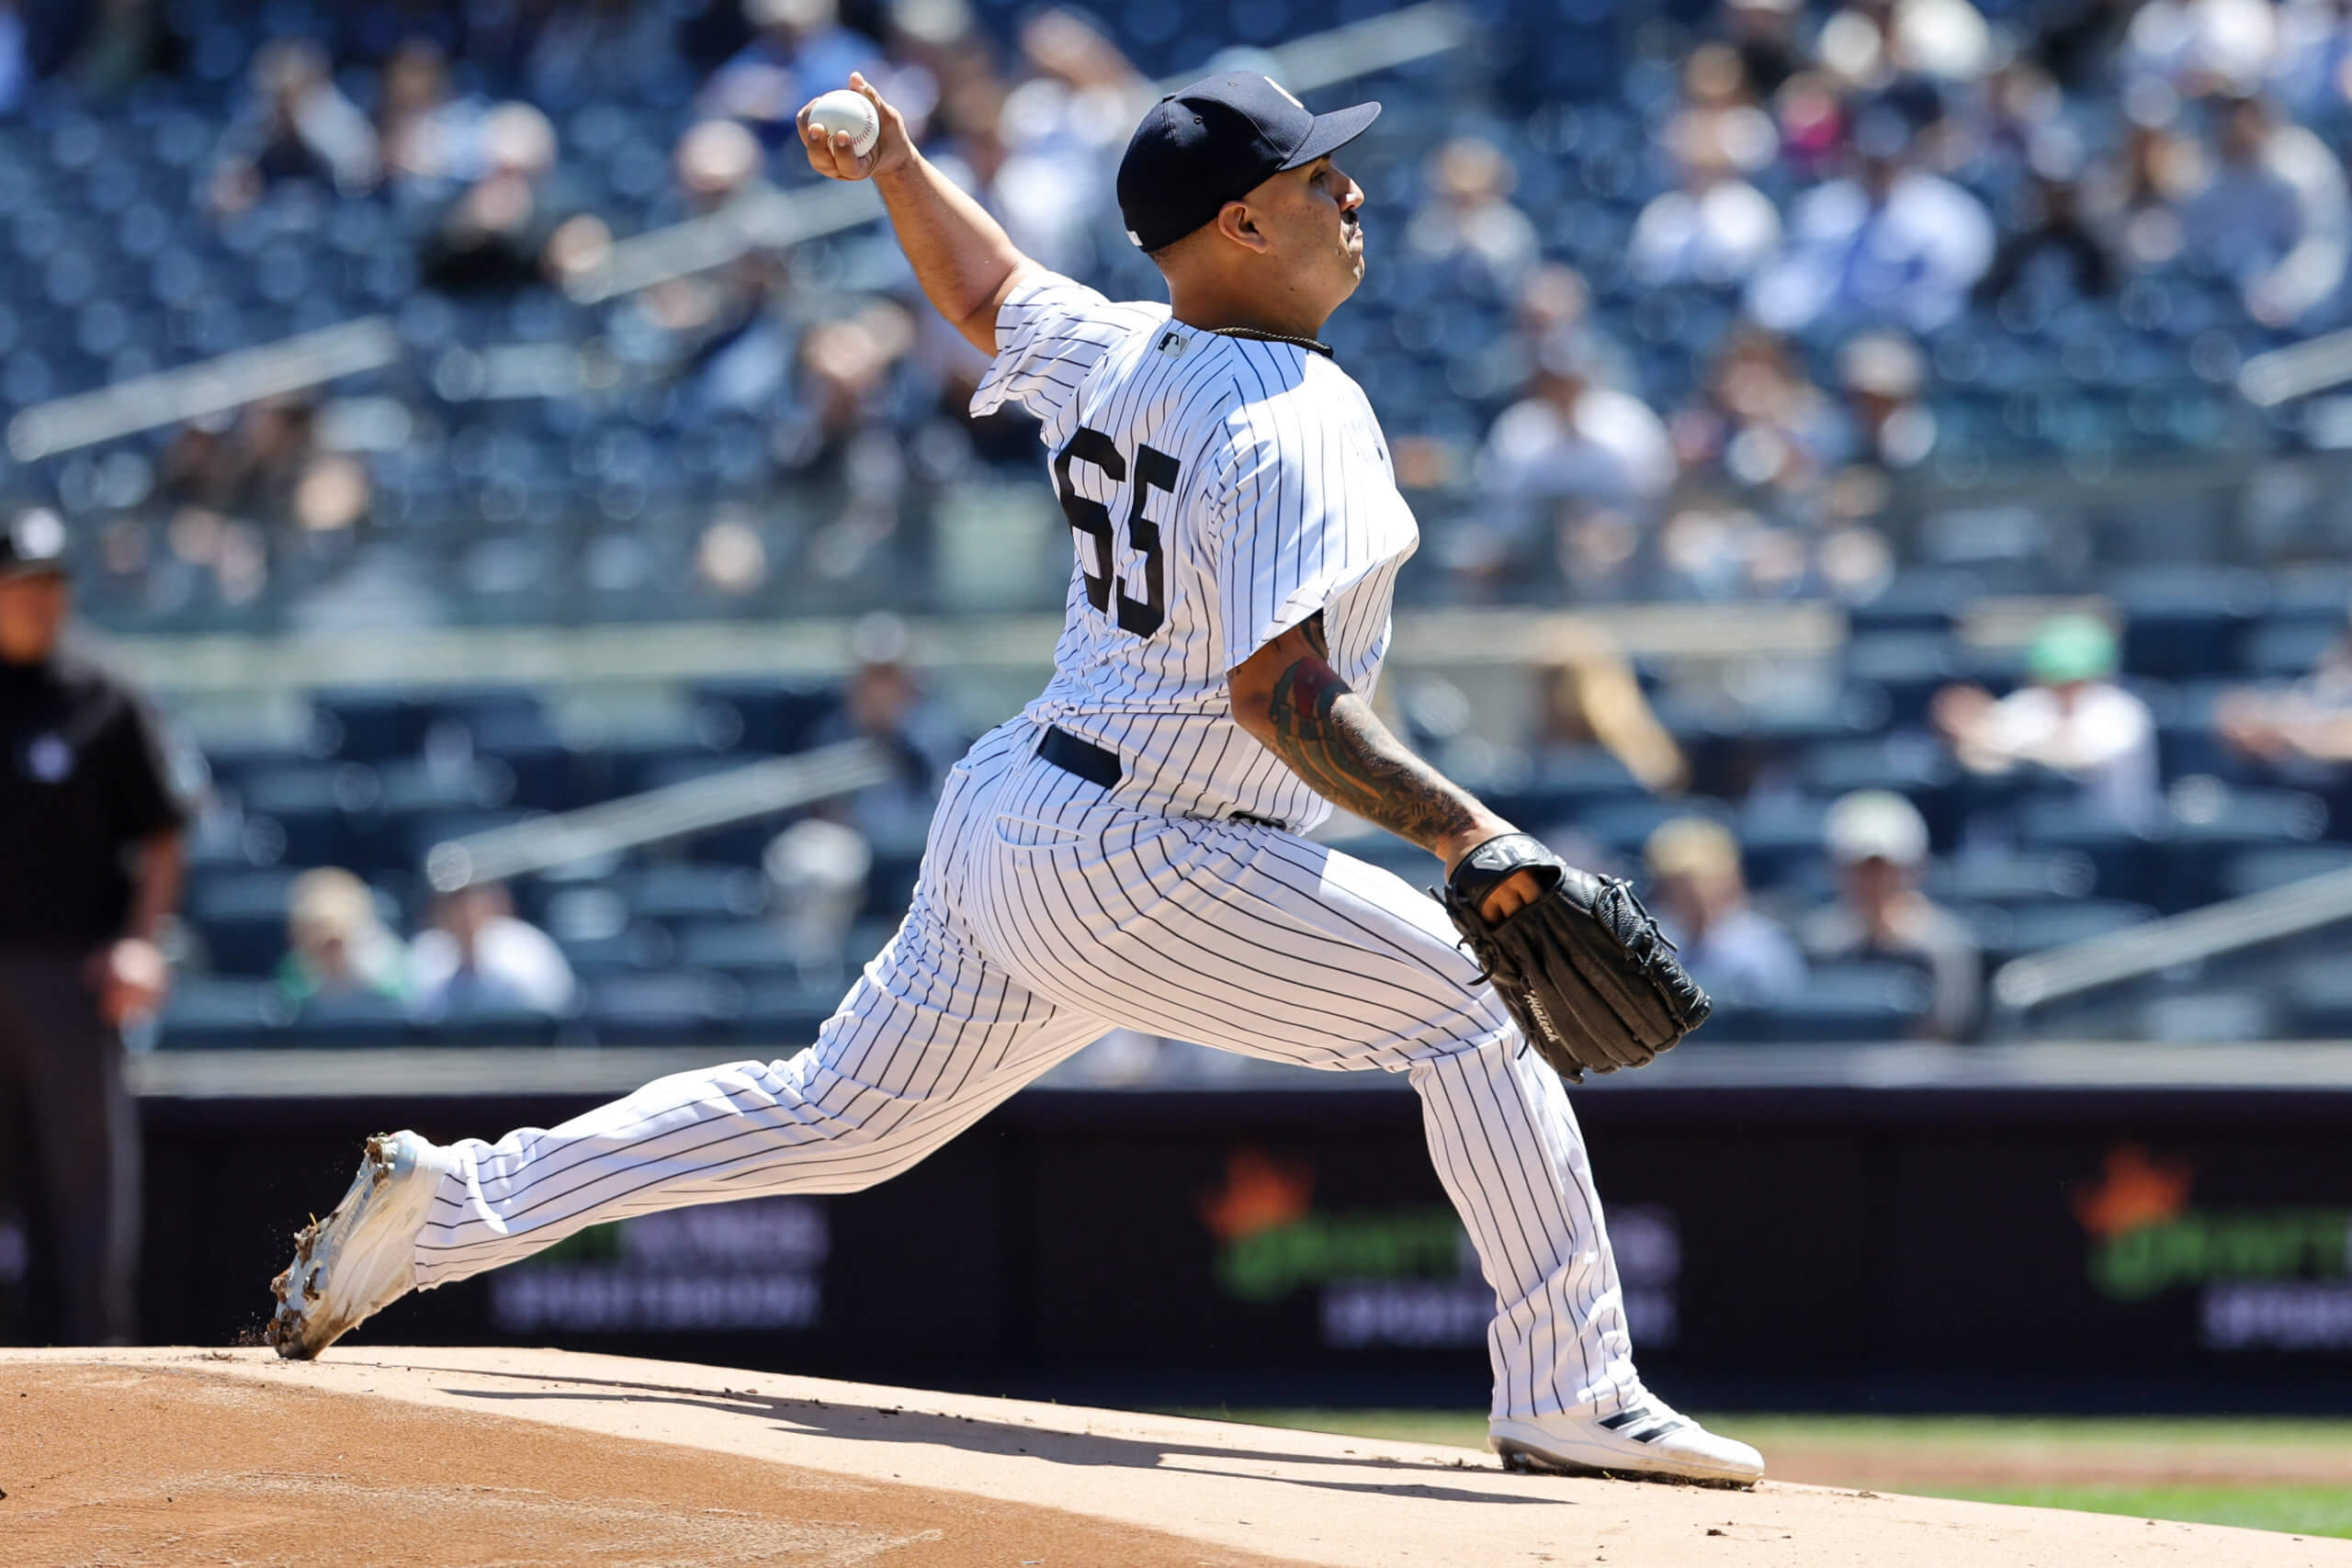 Nestor Cortes throws one-hit gem in New York Yankees win over